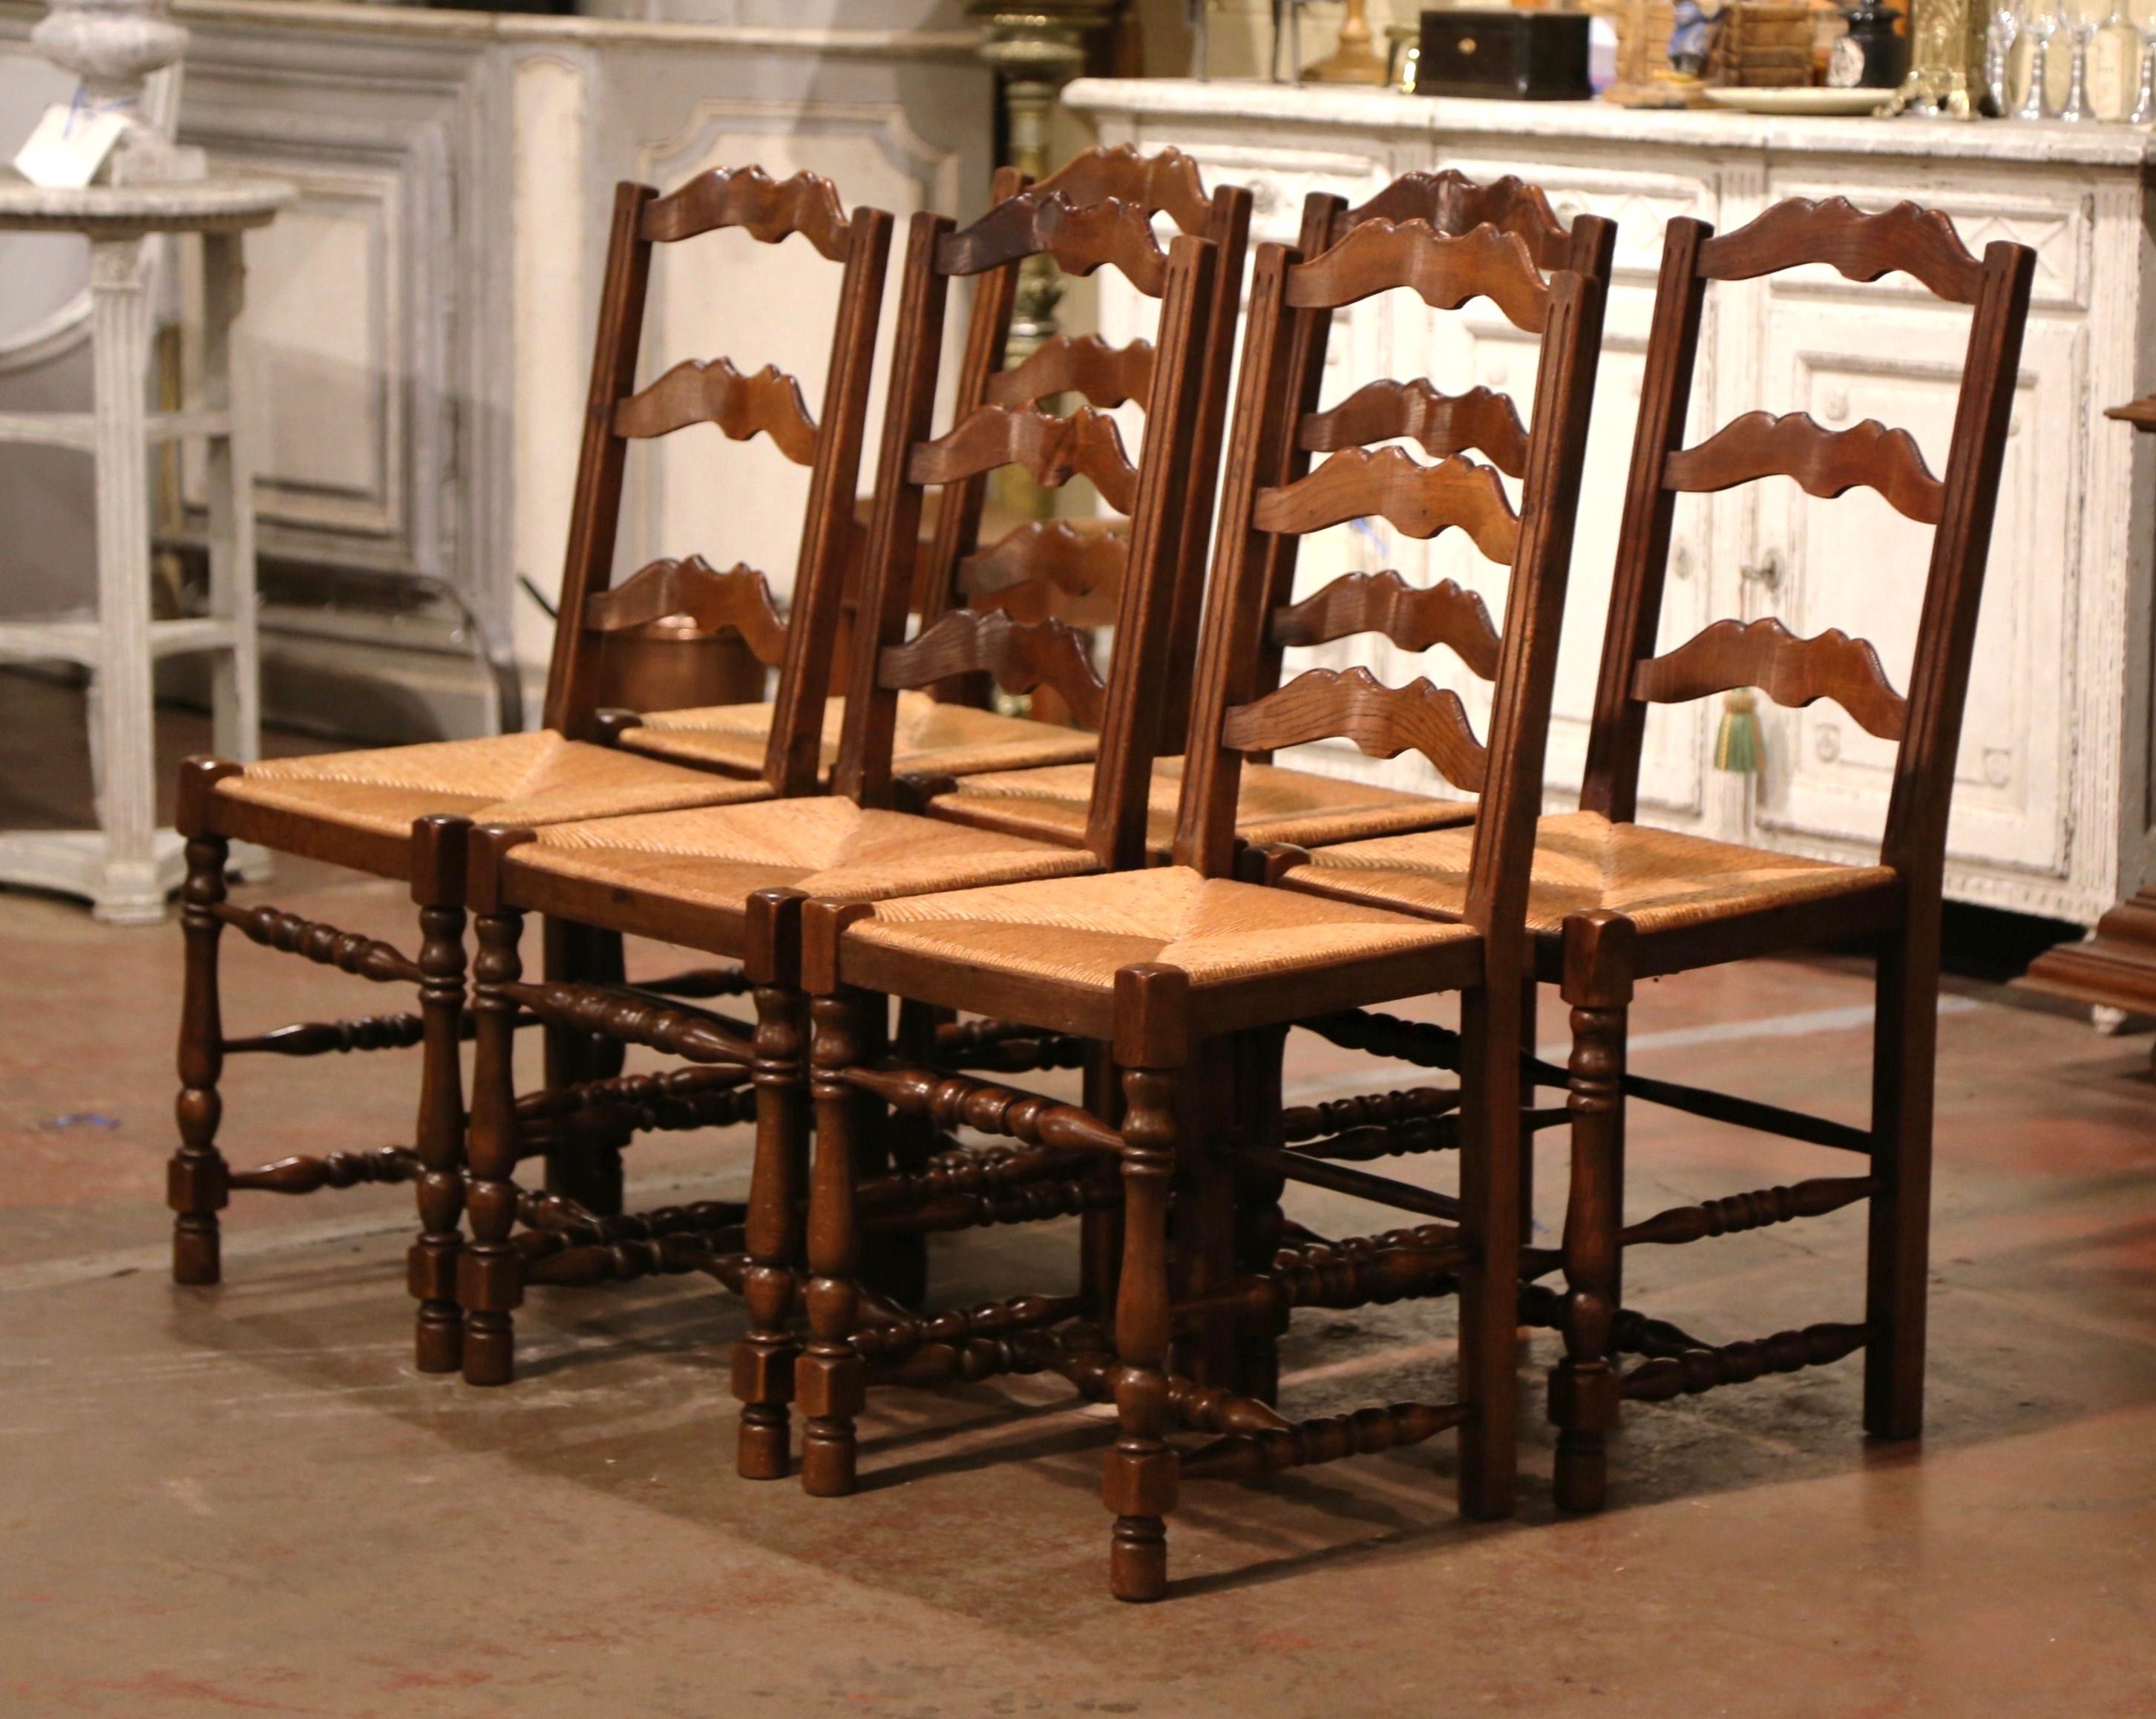 These six elegant country chairs were crafted in Normandy, France, circa 1960. Carved from solid oak, each chair stands on carved turned legs embellished with a bottom stretcher. Each chair has a tall pitched back with three scalloped ladders across